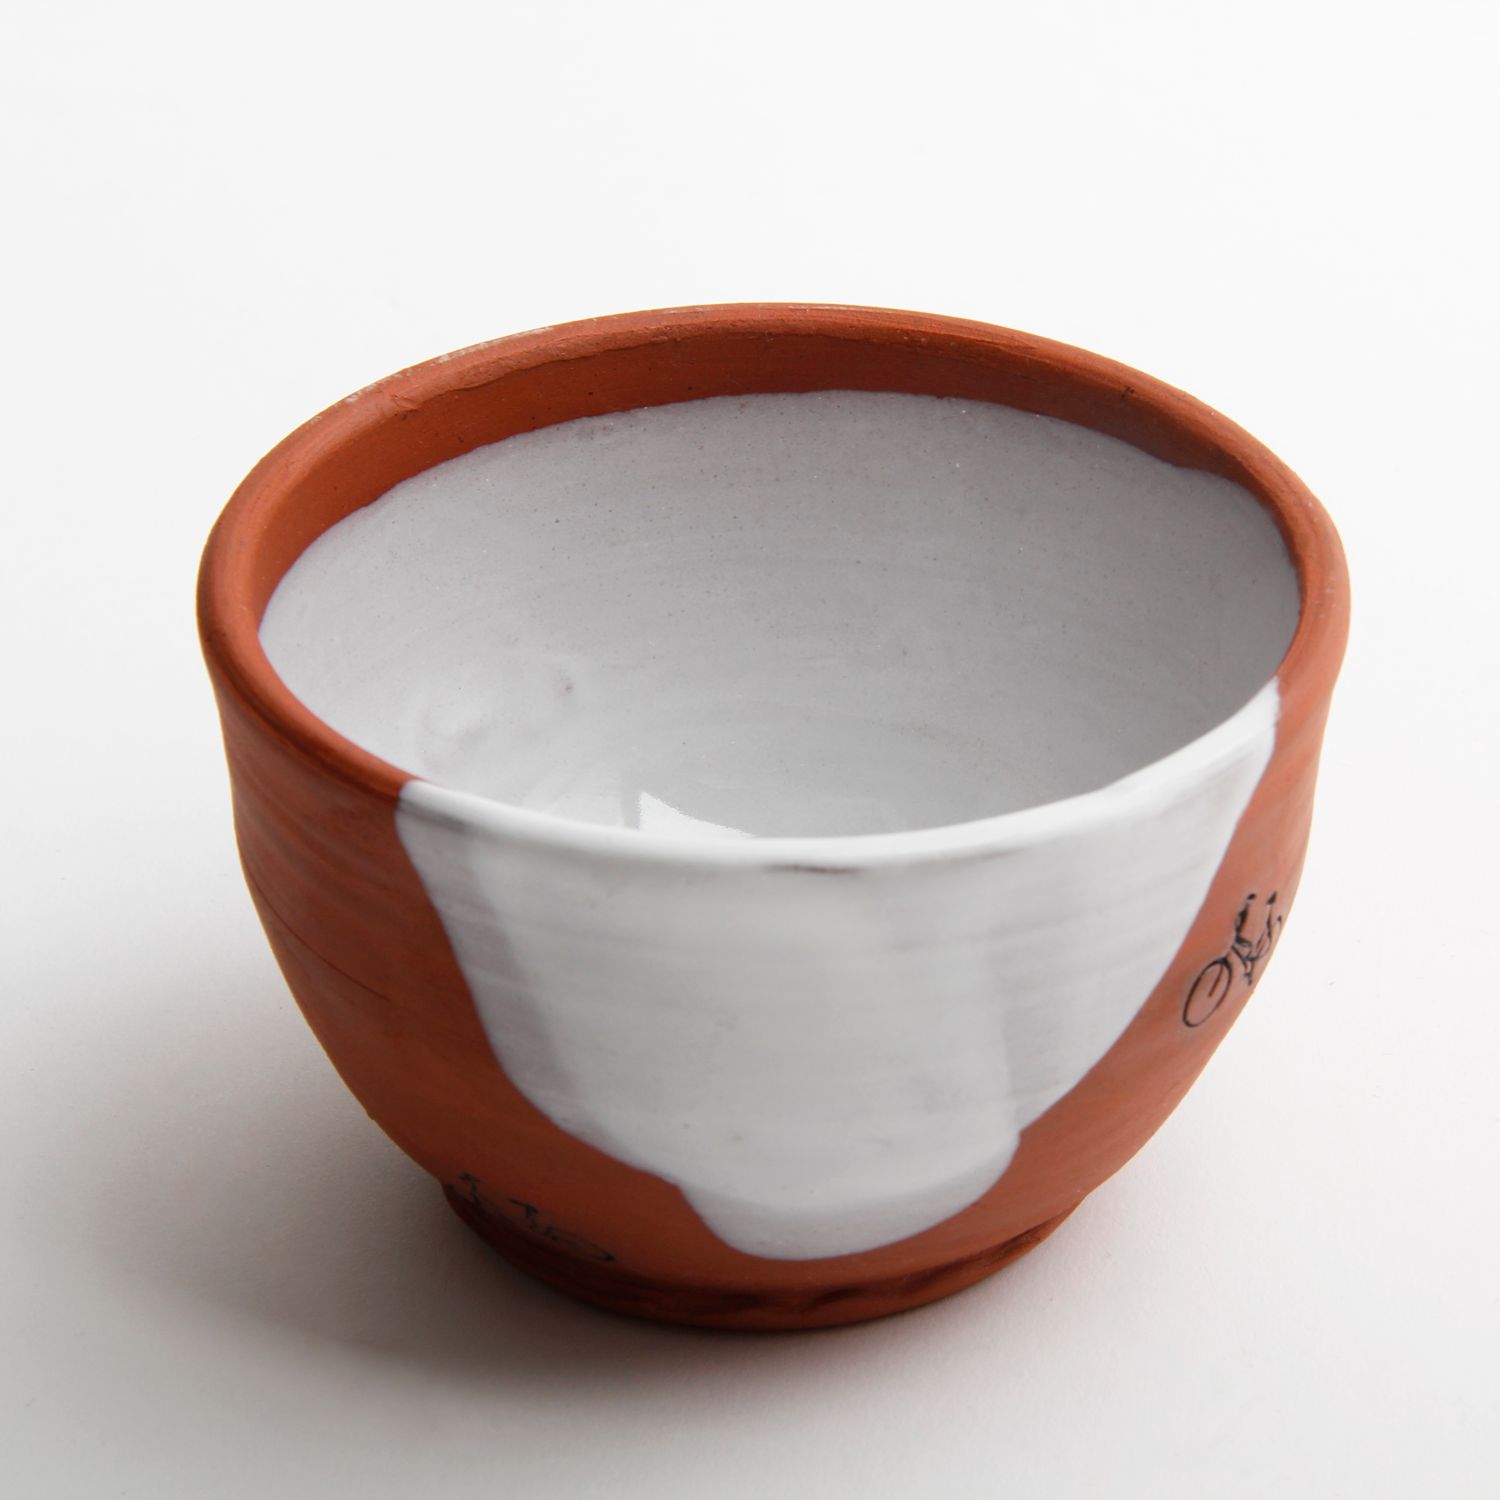 Mary McKenzie: Bicycle Bowl White Product Image 3 of 3